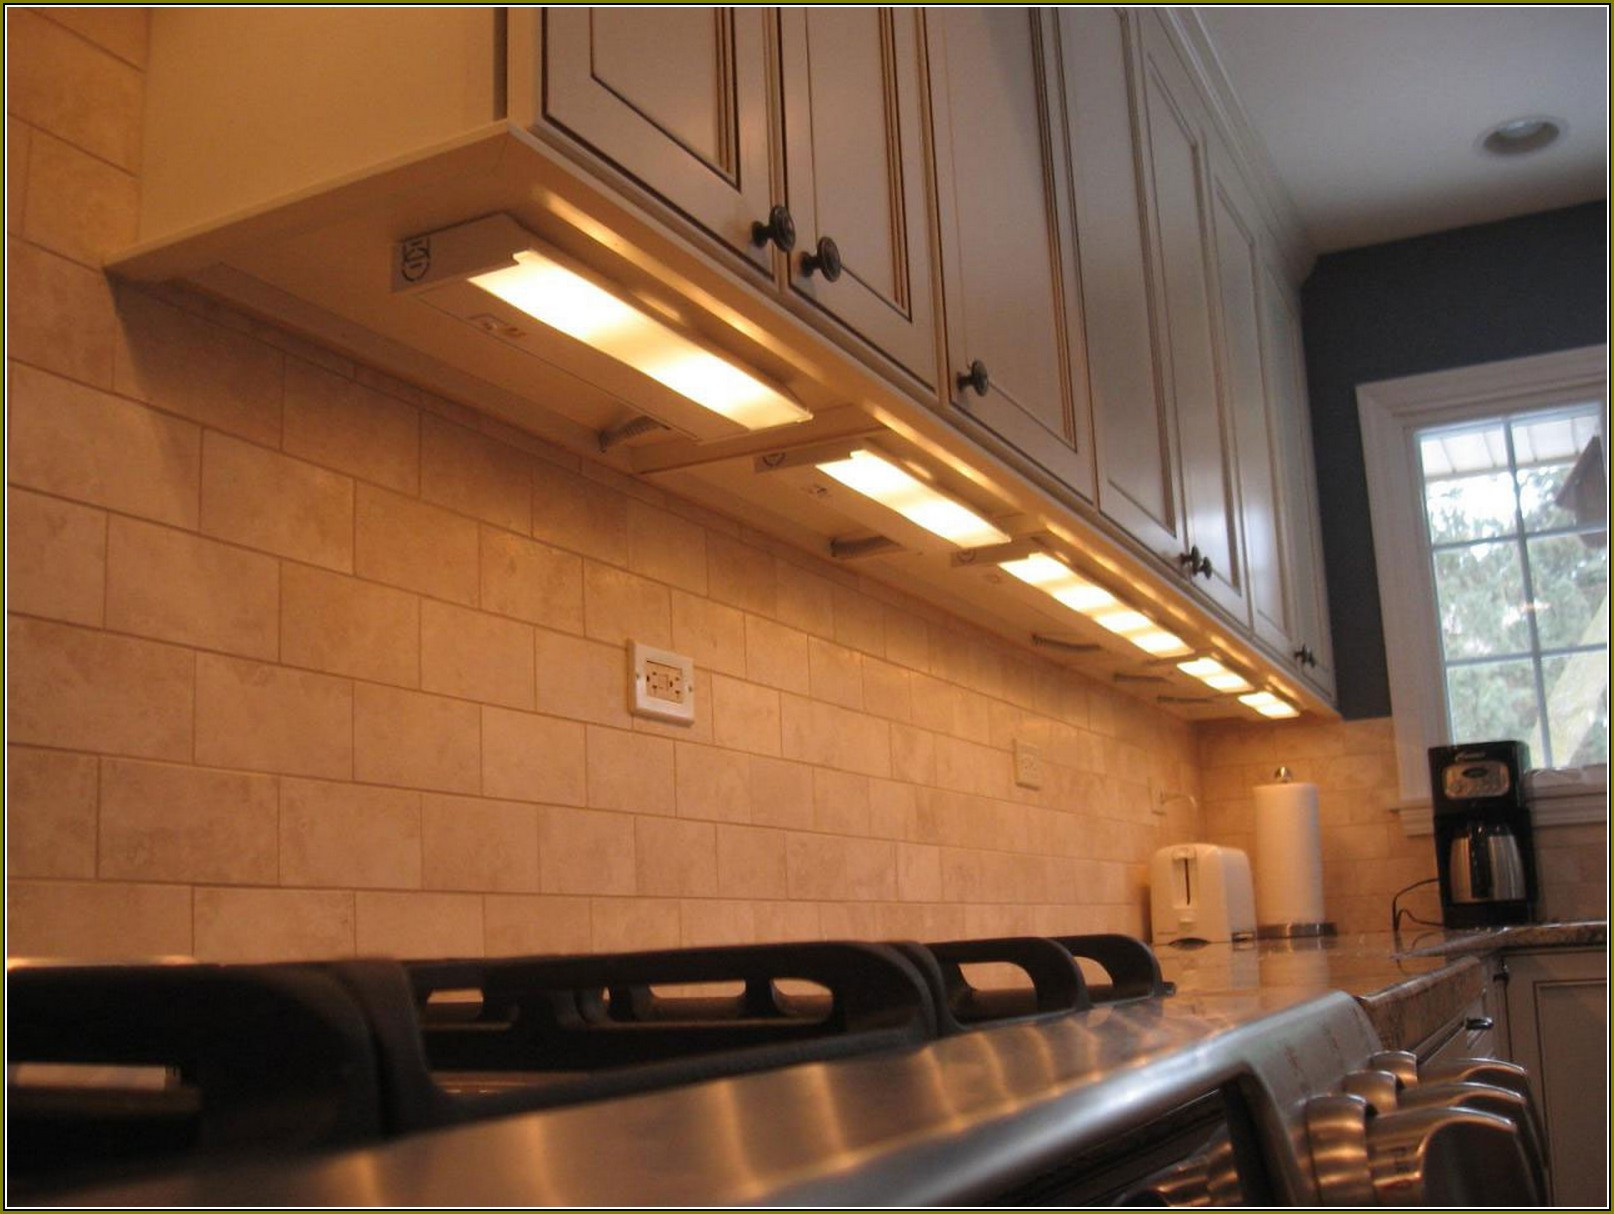 Led Lighting Under Cabinet Kitchen
 Pull Out Cabinet Base Cabinet Pull Out Shelves Pull Out